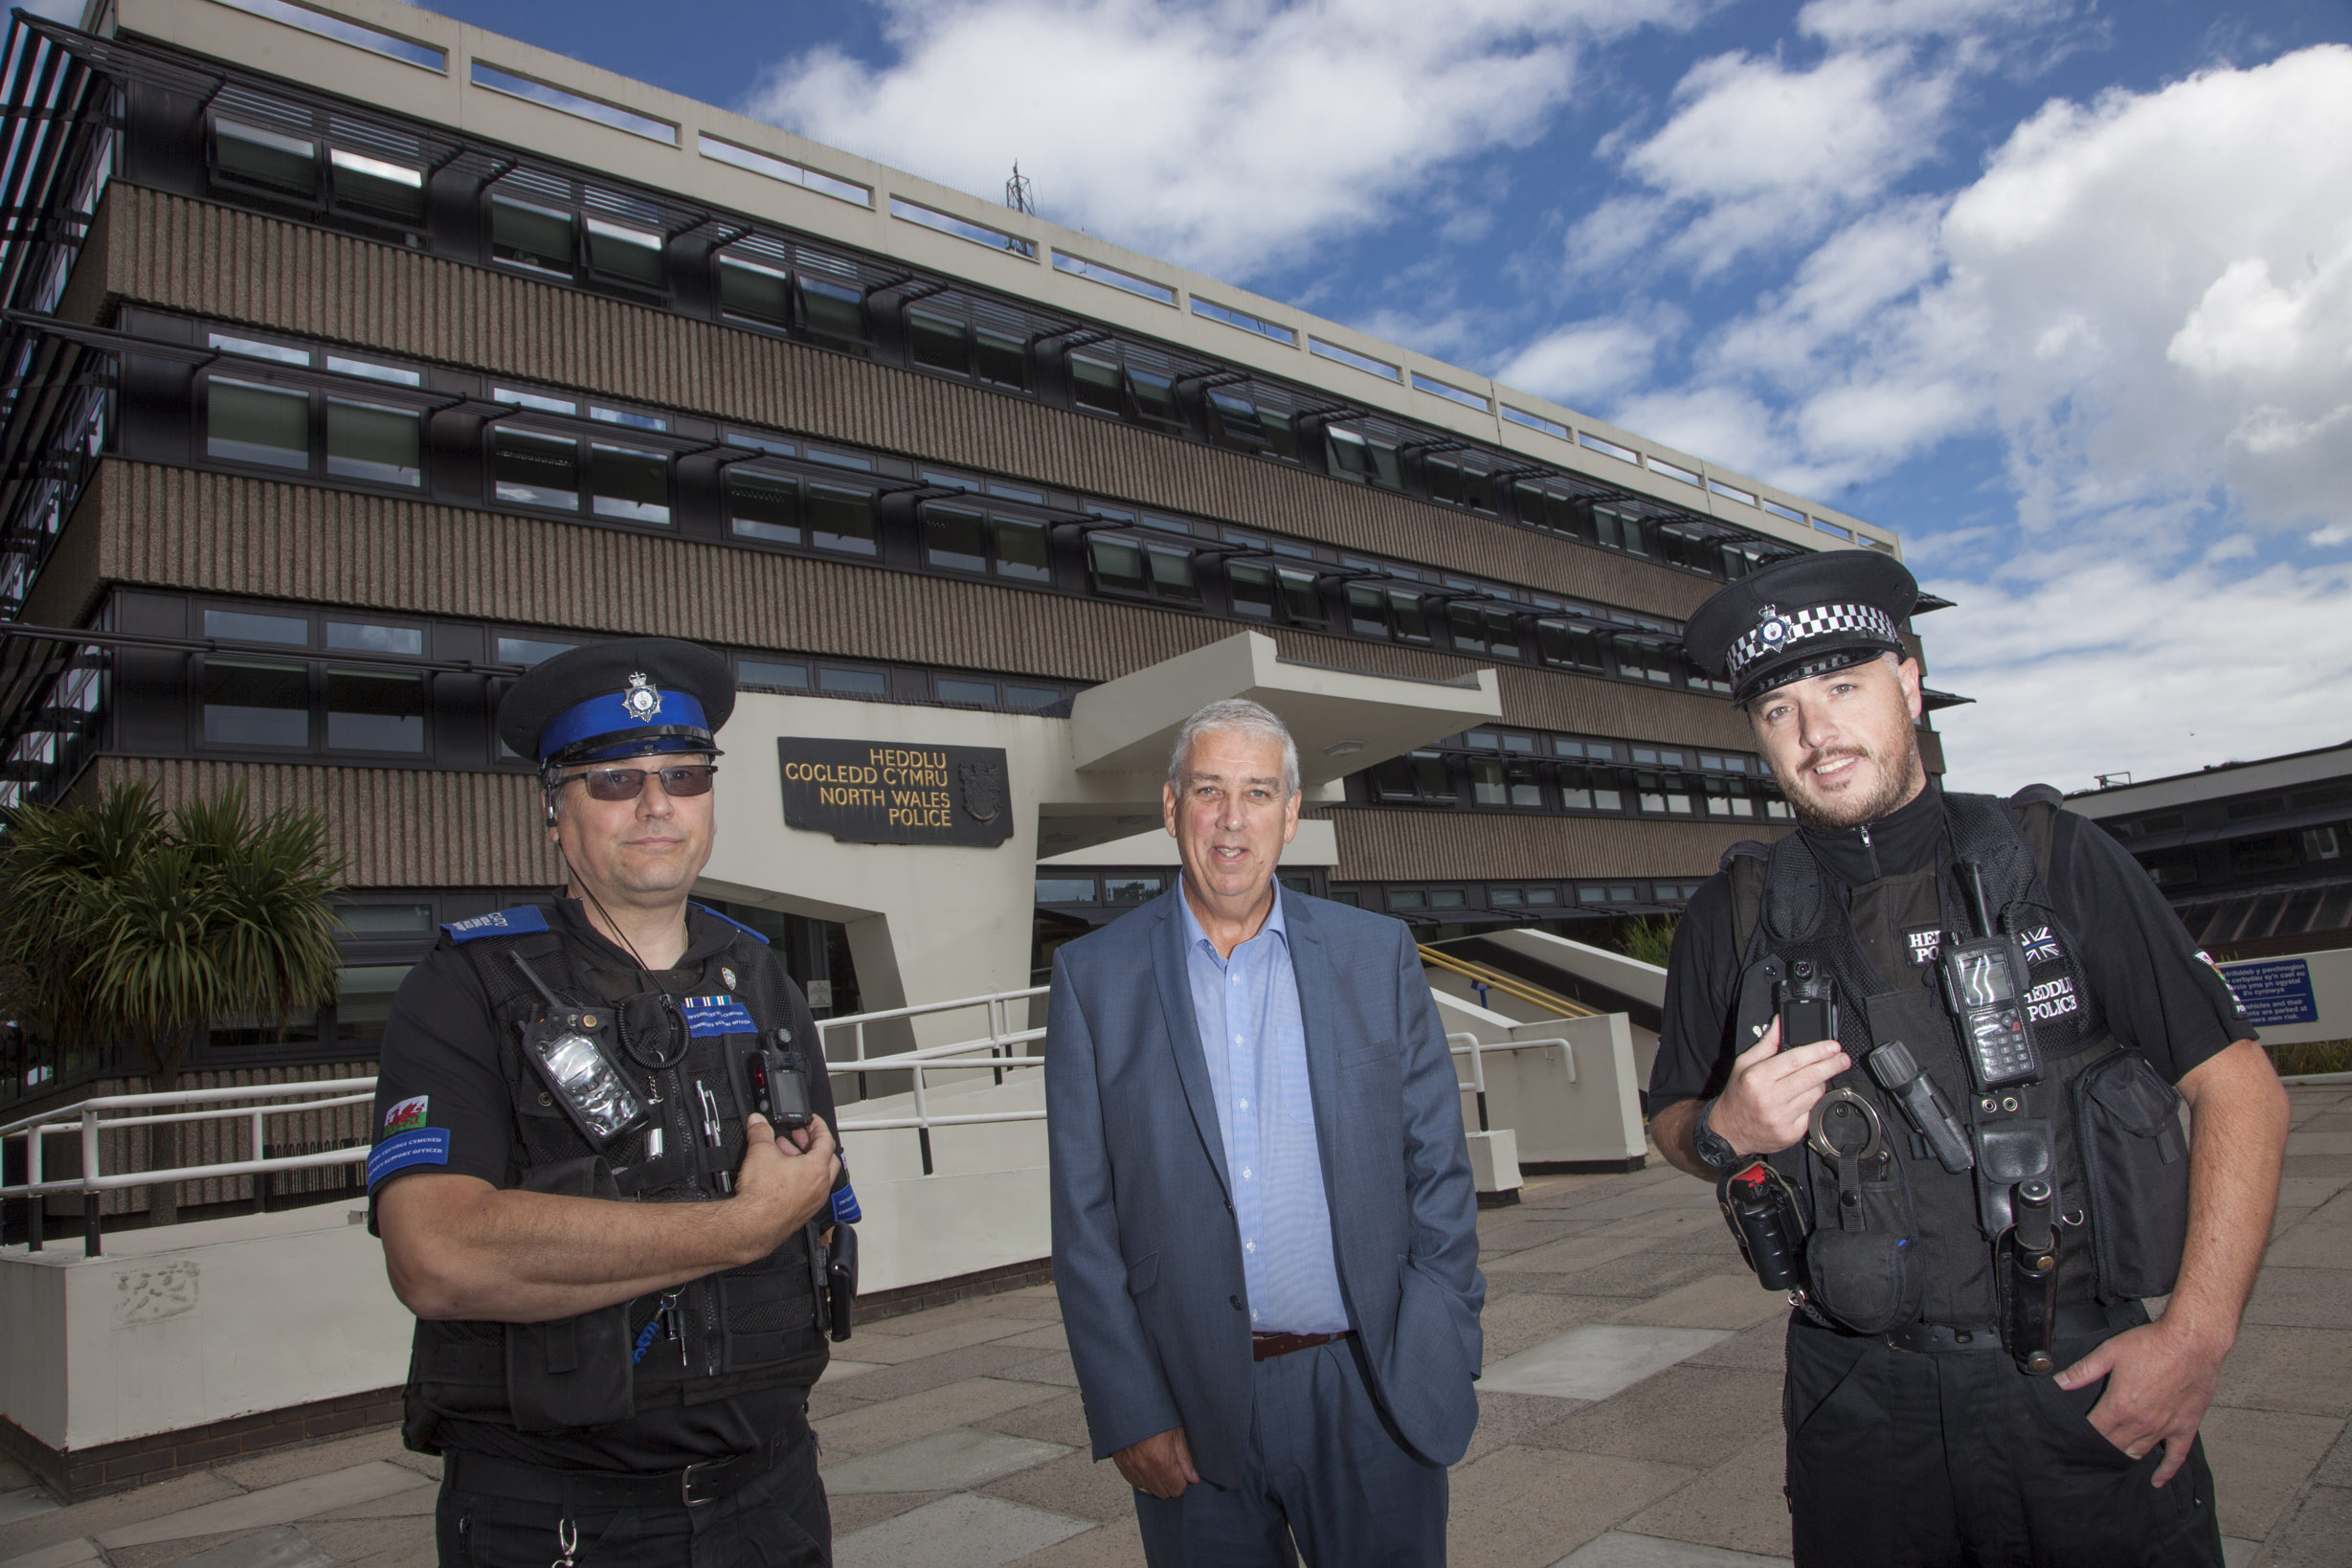 Wales first as body worn video will be issued to all police officers on duty